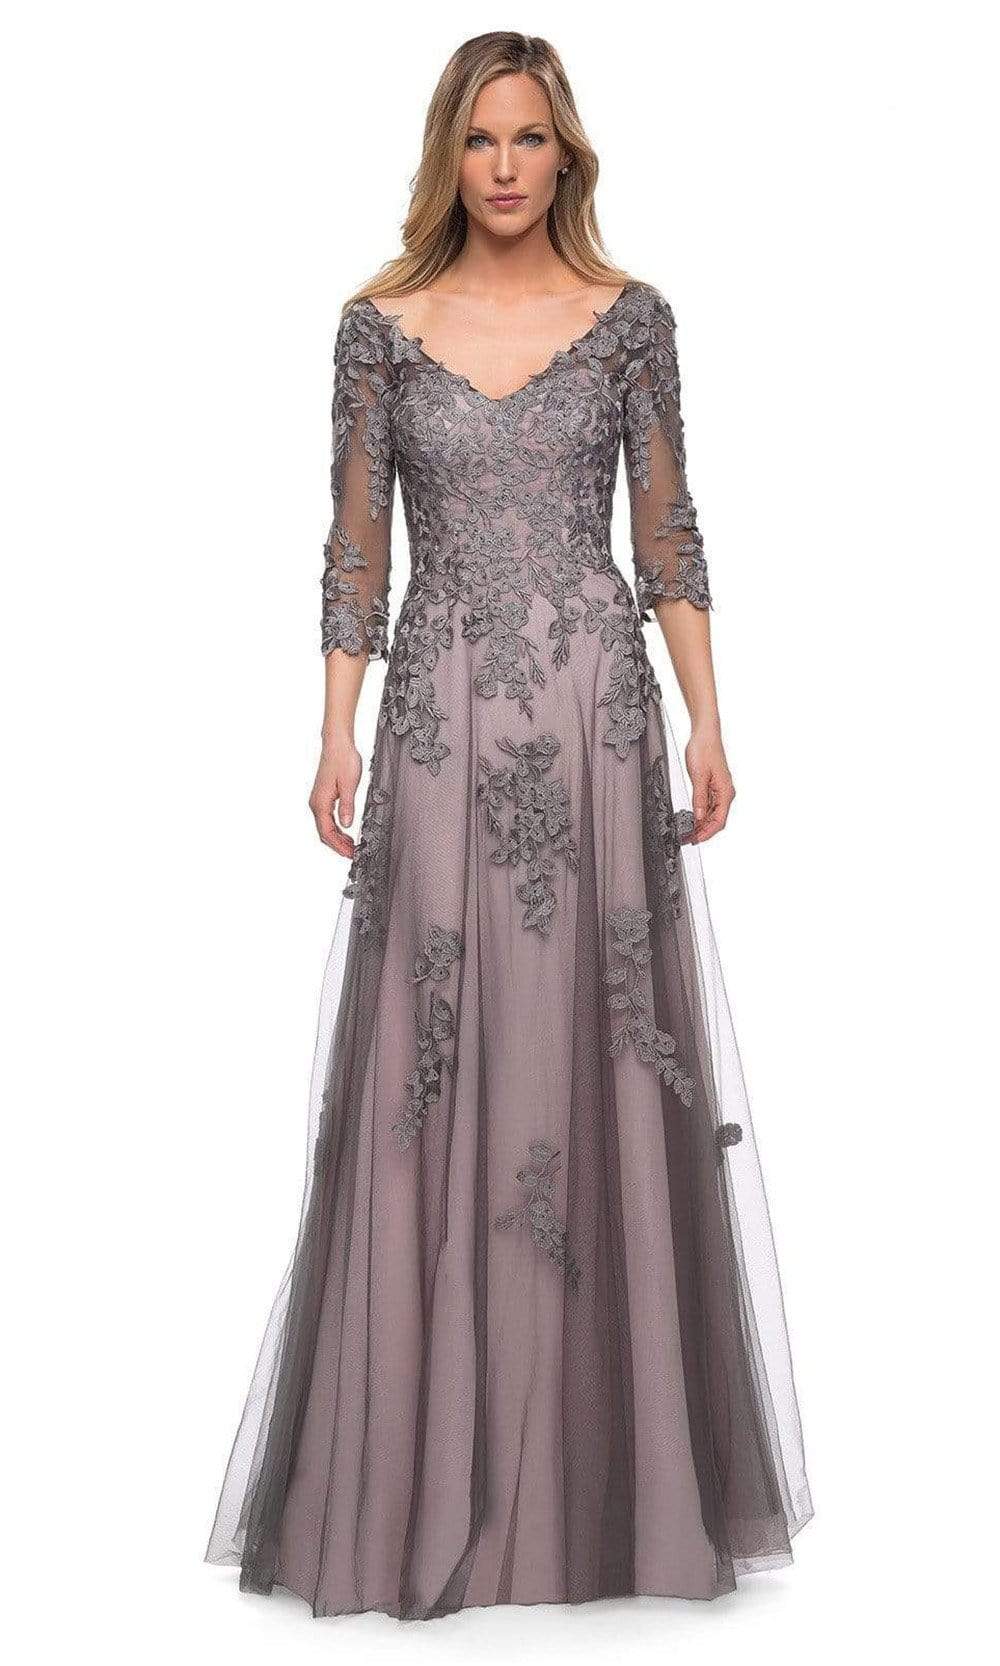 Image of La Femme - 29205 Floral Embroidered A-line Gown